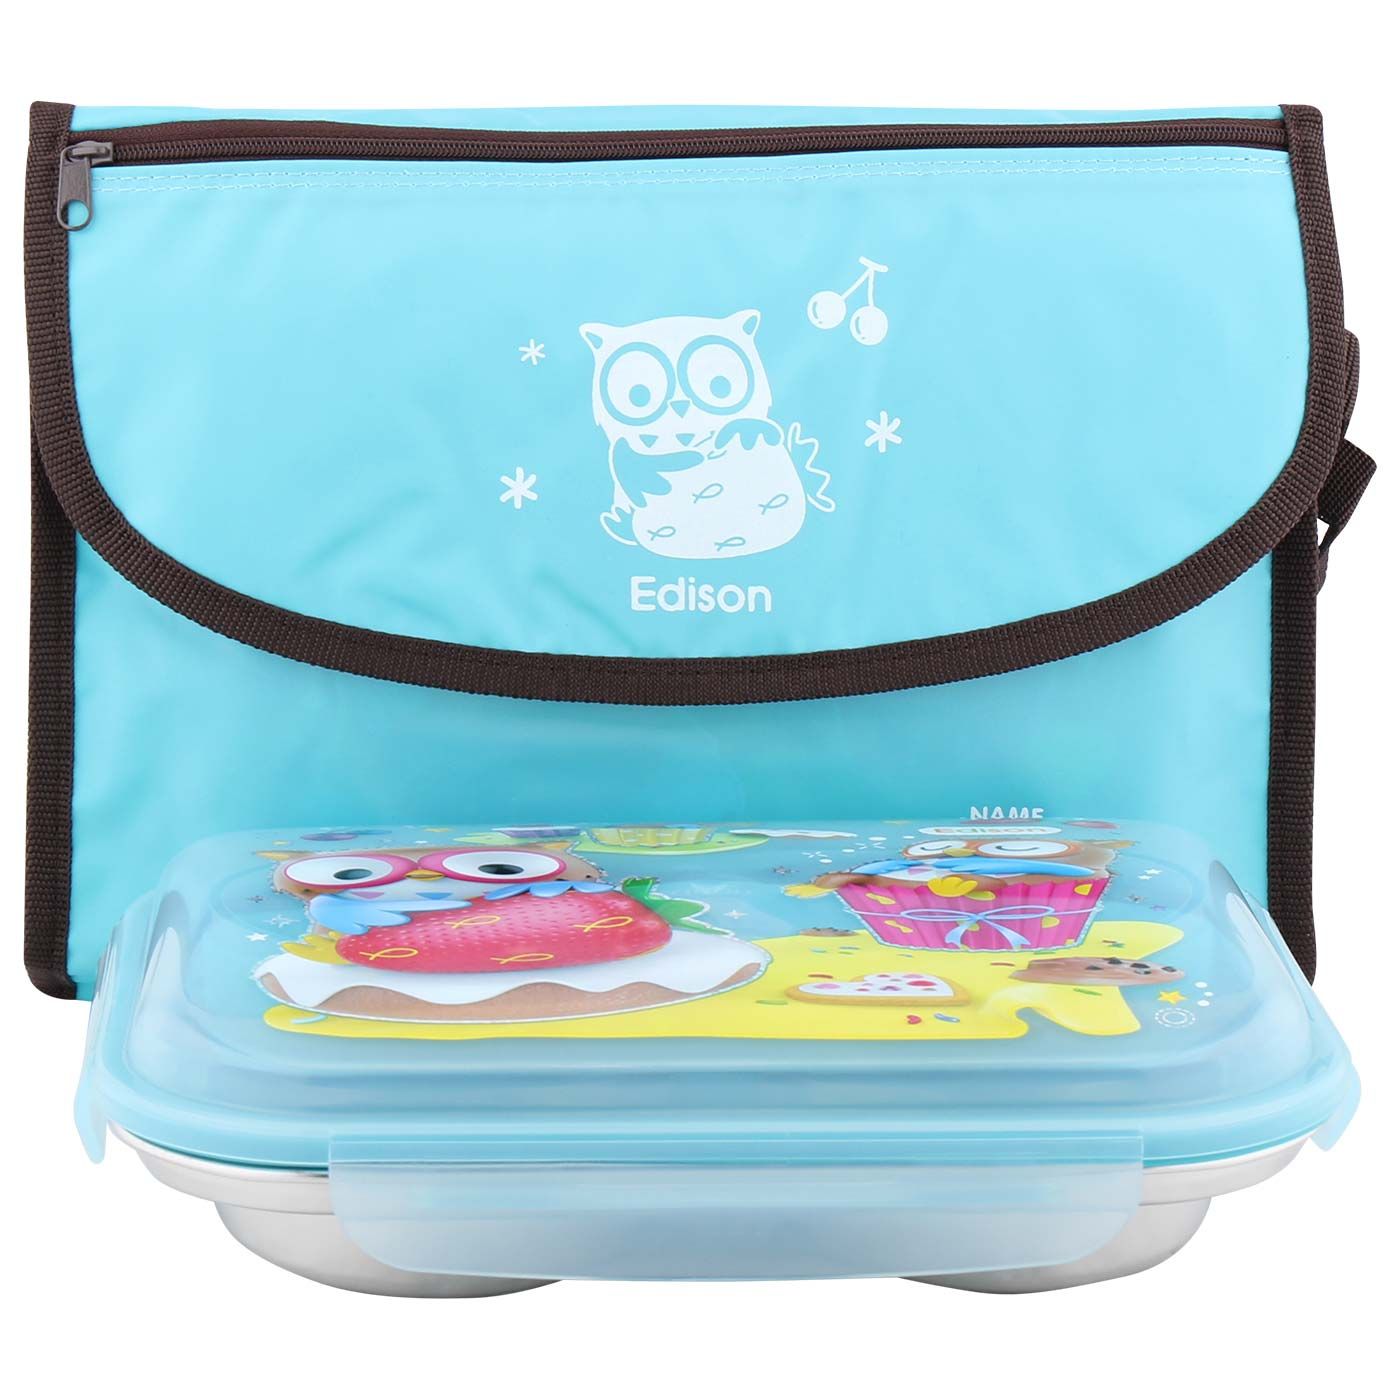 Edison Stainless Lunch Box With Pouch Blue - 1